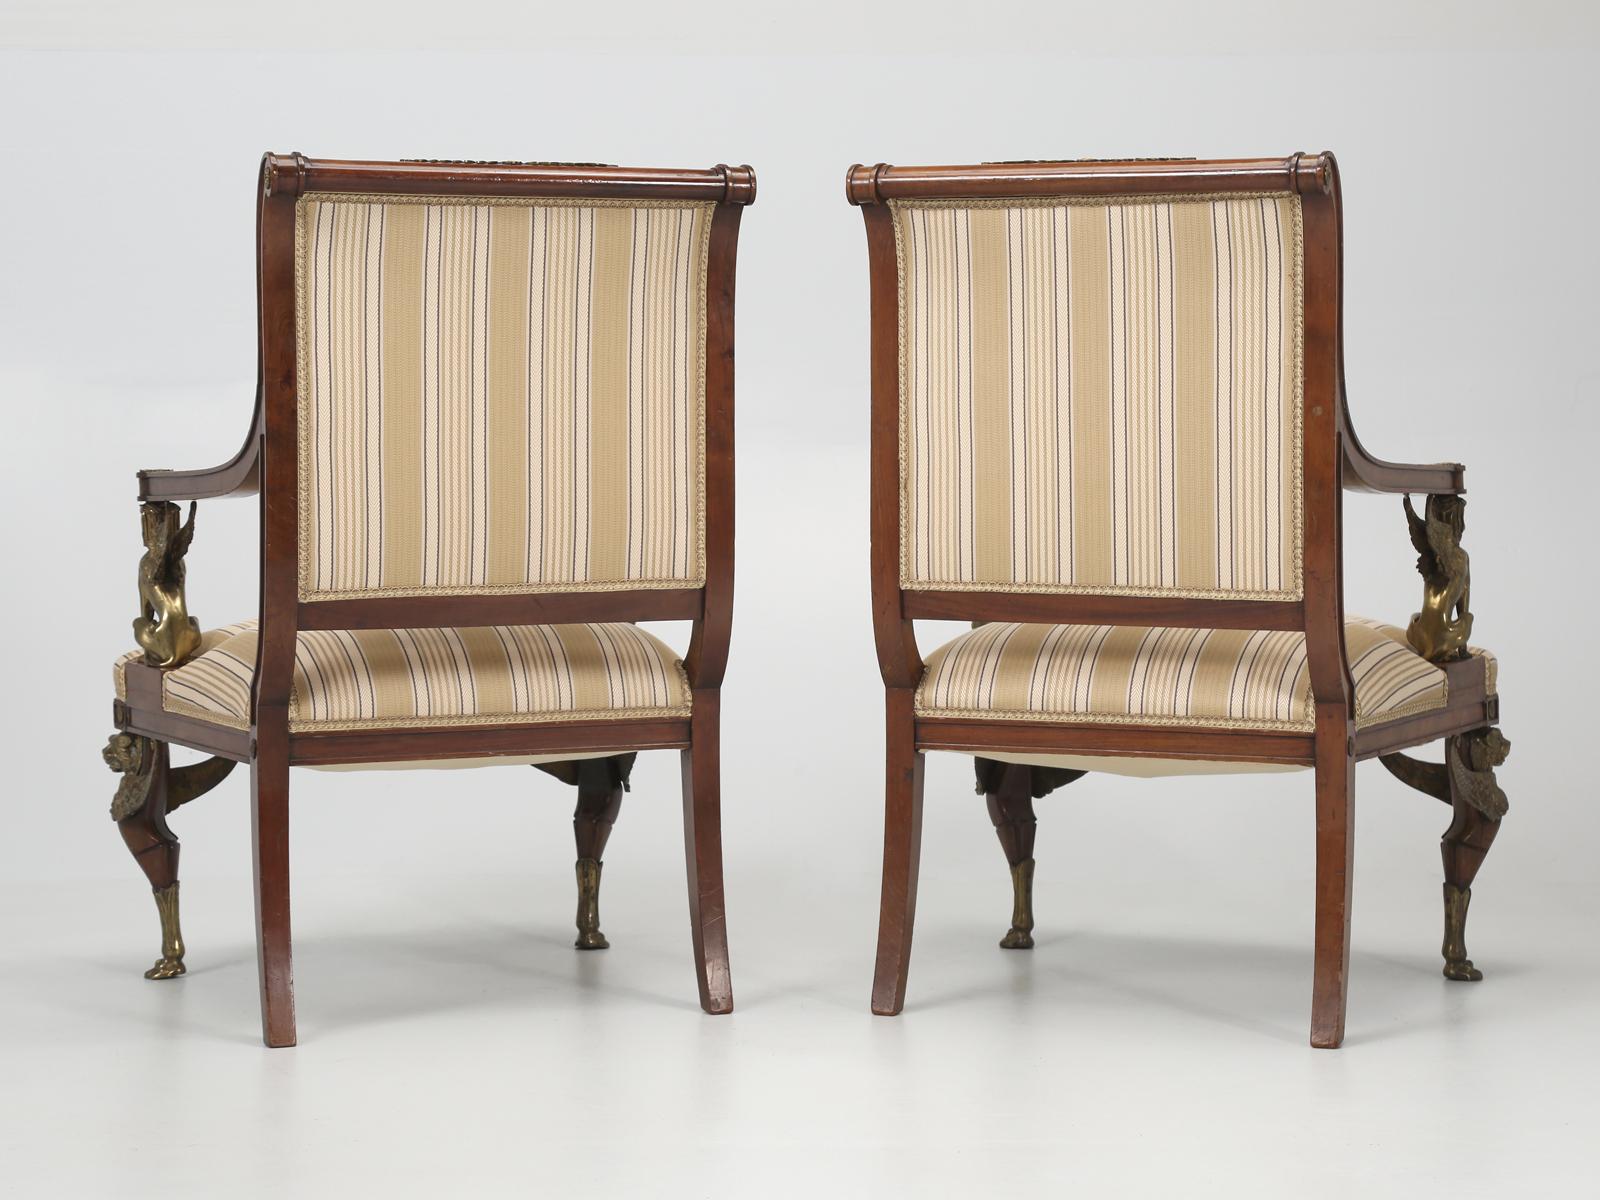 Antique French Empire Revival Arm Chairs Mahogany with Exceptional Quality c1840 For Sale 9